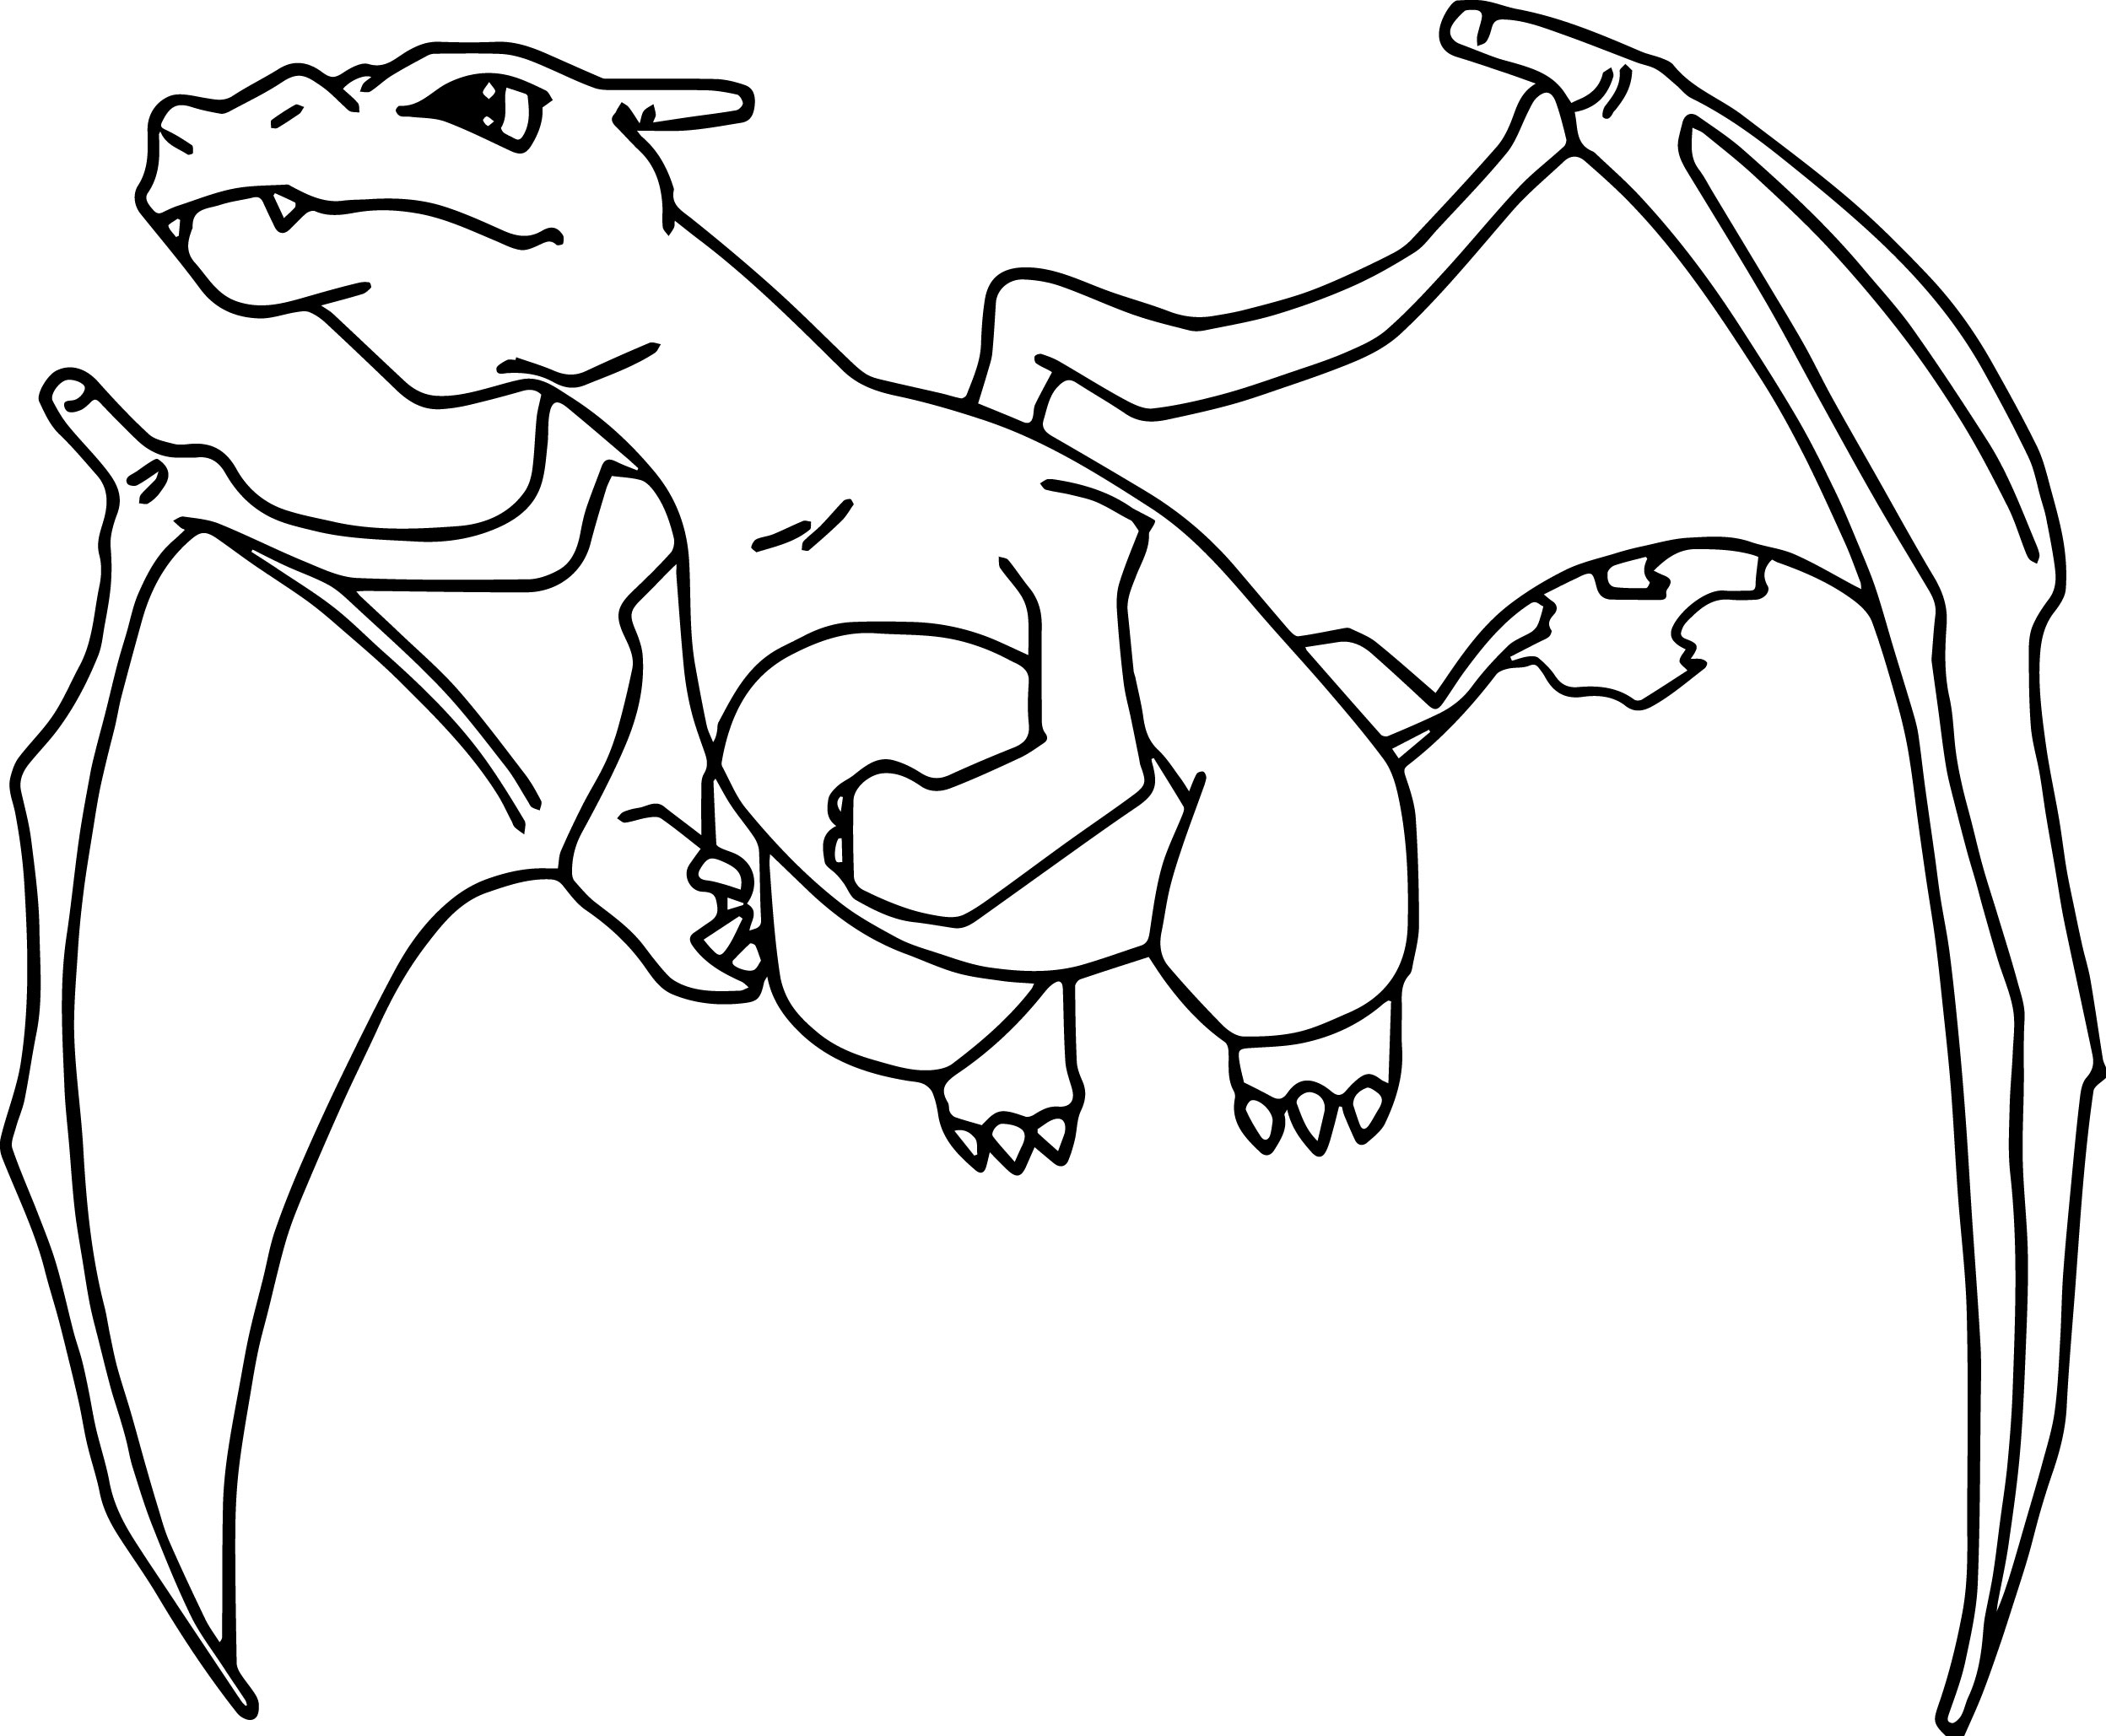 Pokemon Mega Charizard Coloring Pages at GetColorings.com | Free